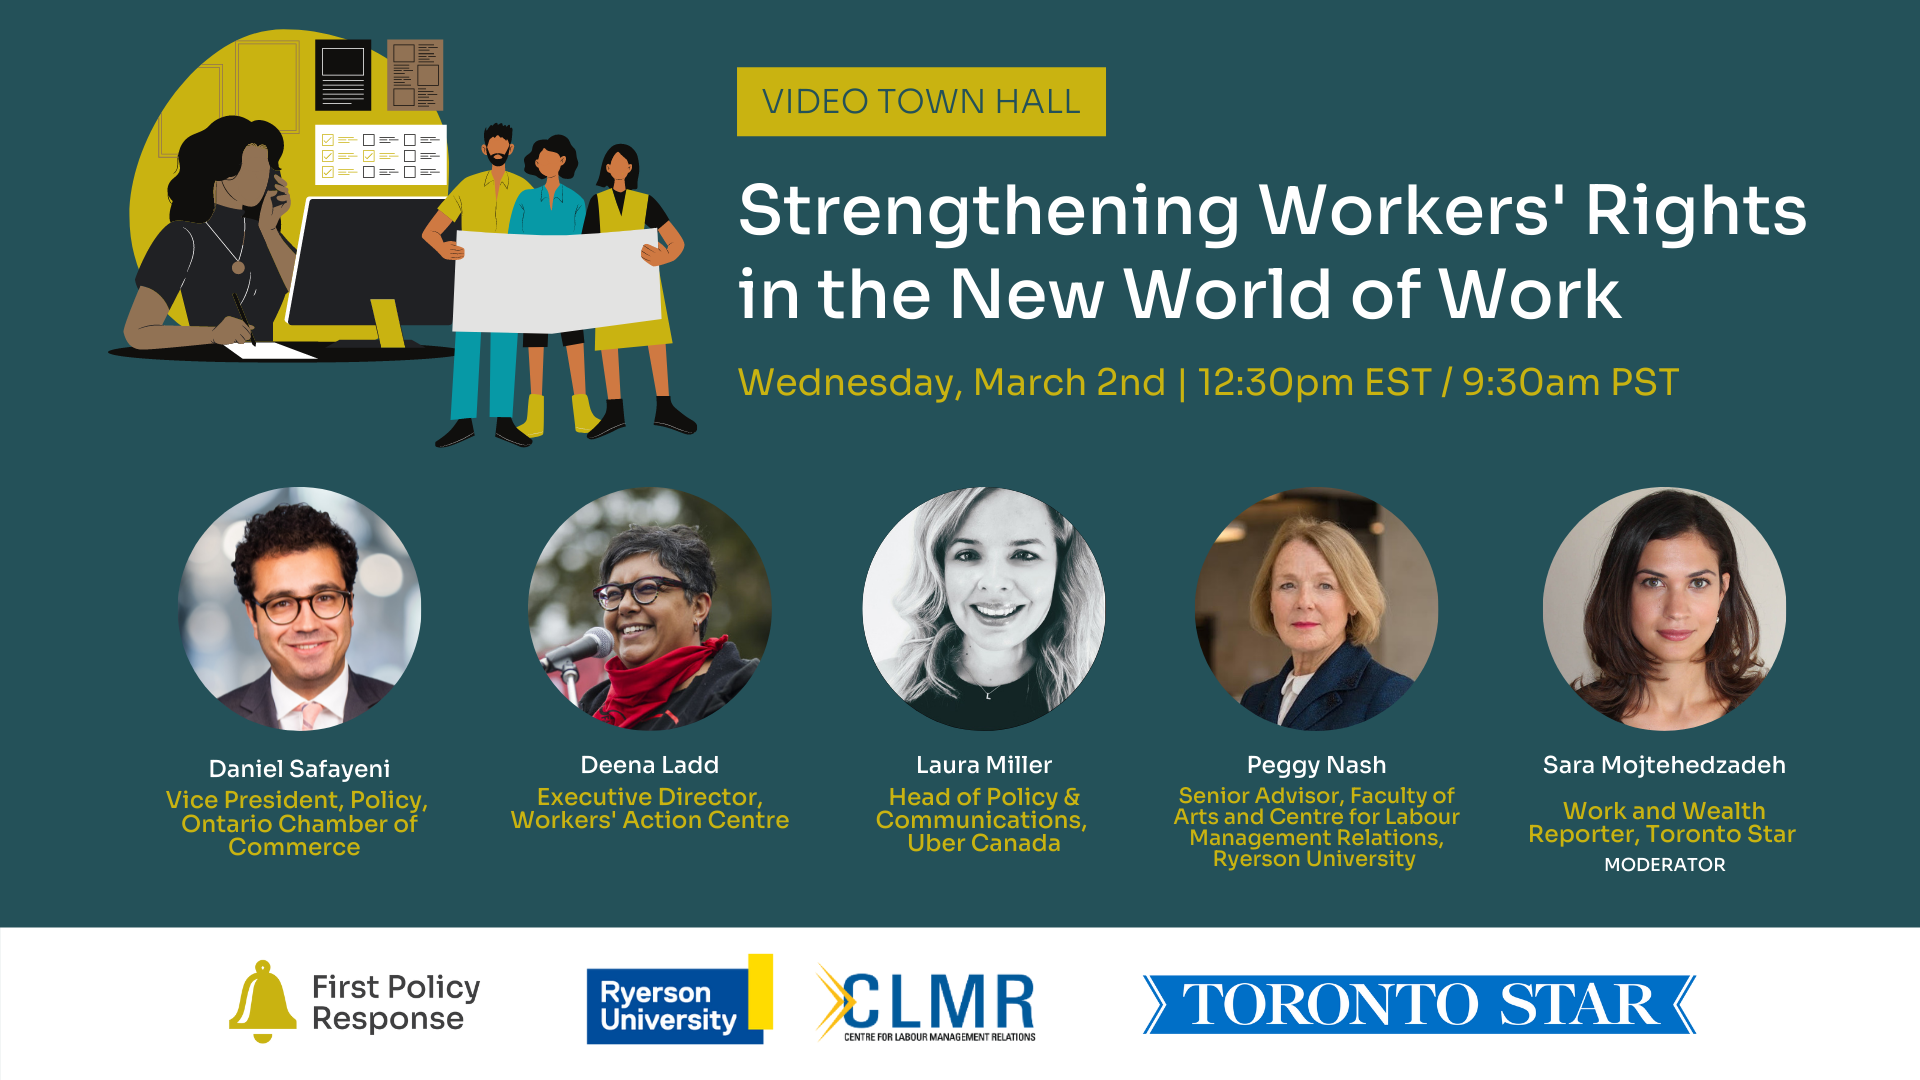 Strengthening Workers' Rights in the New World of Work